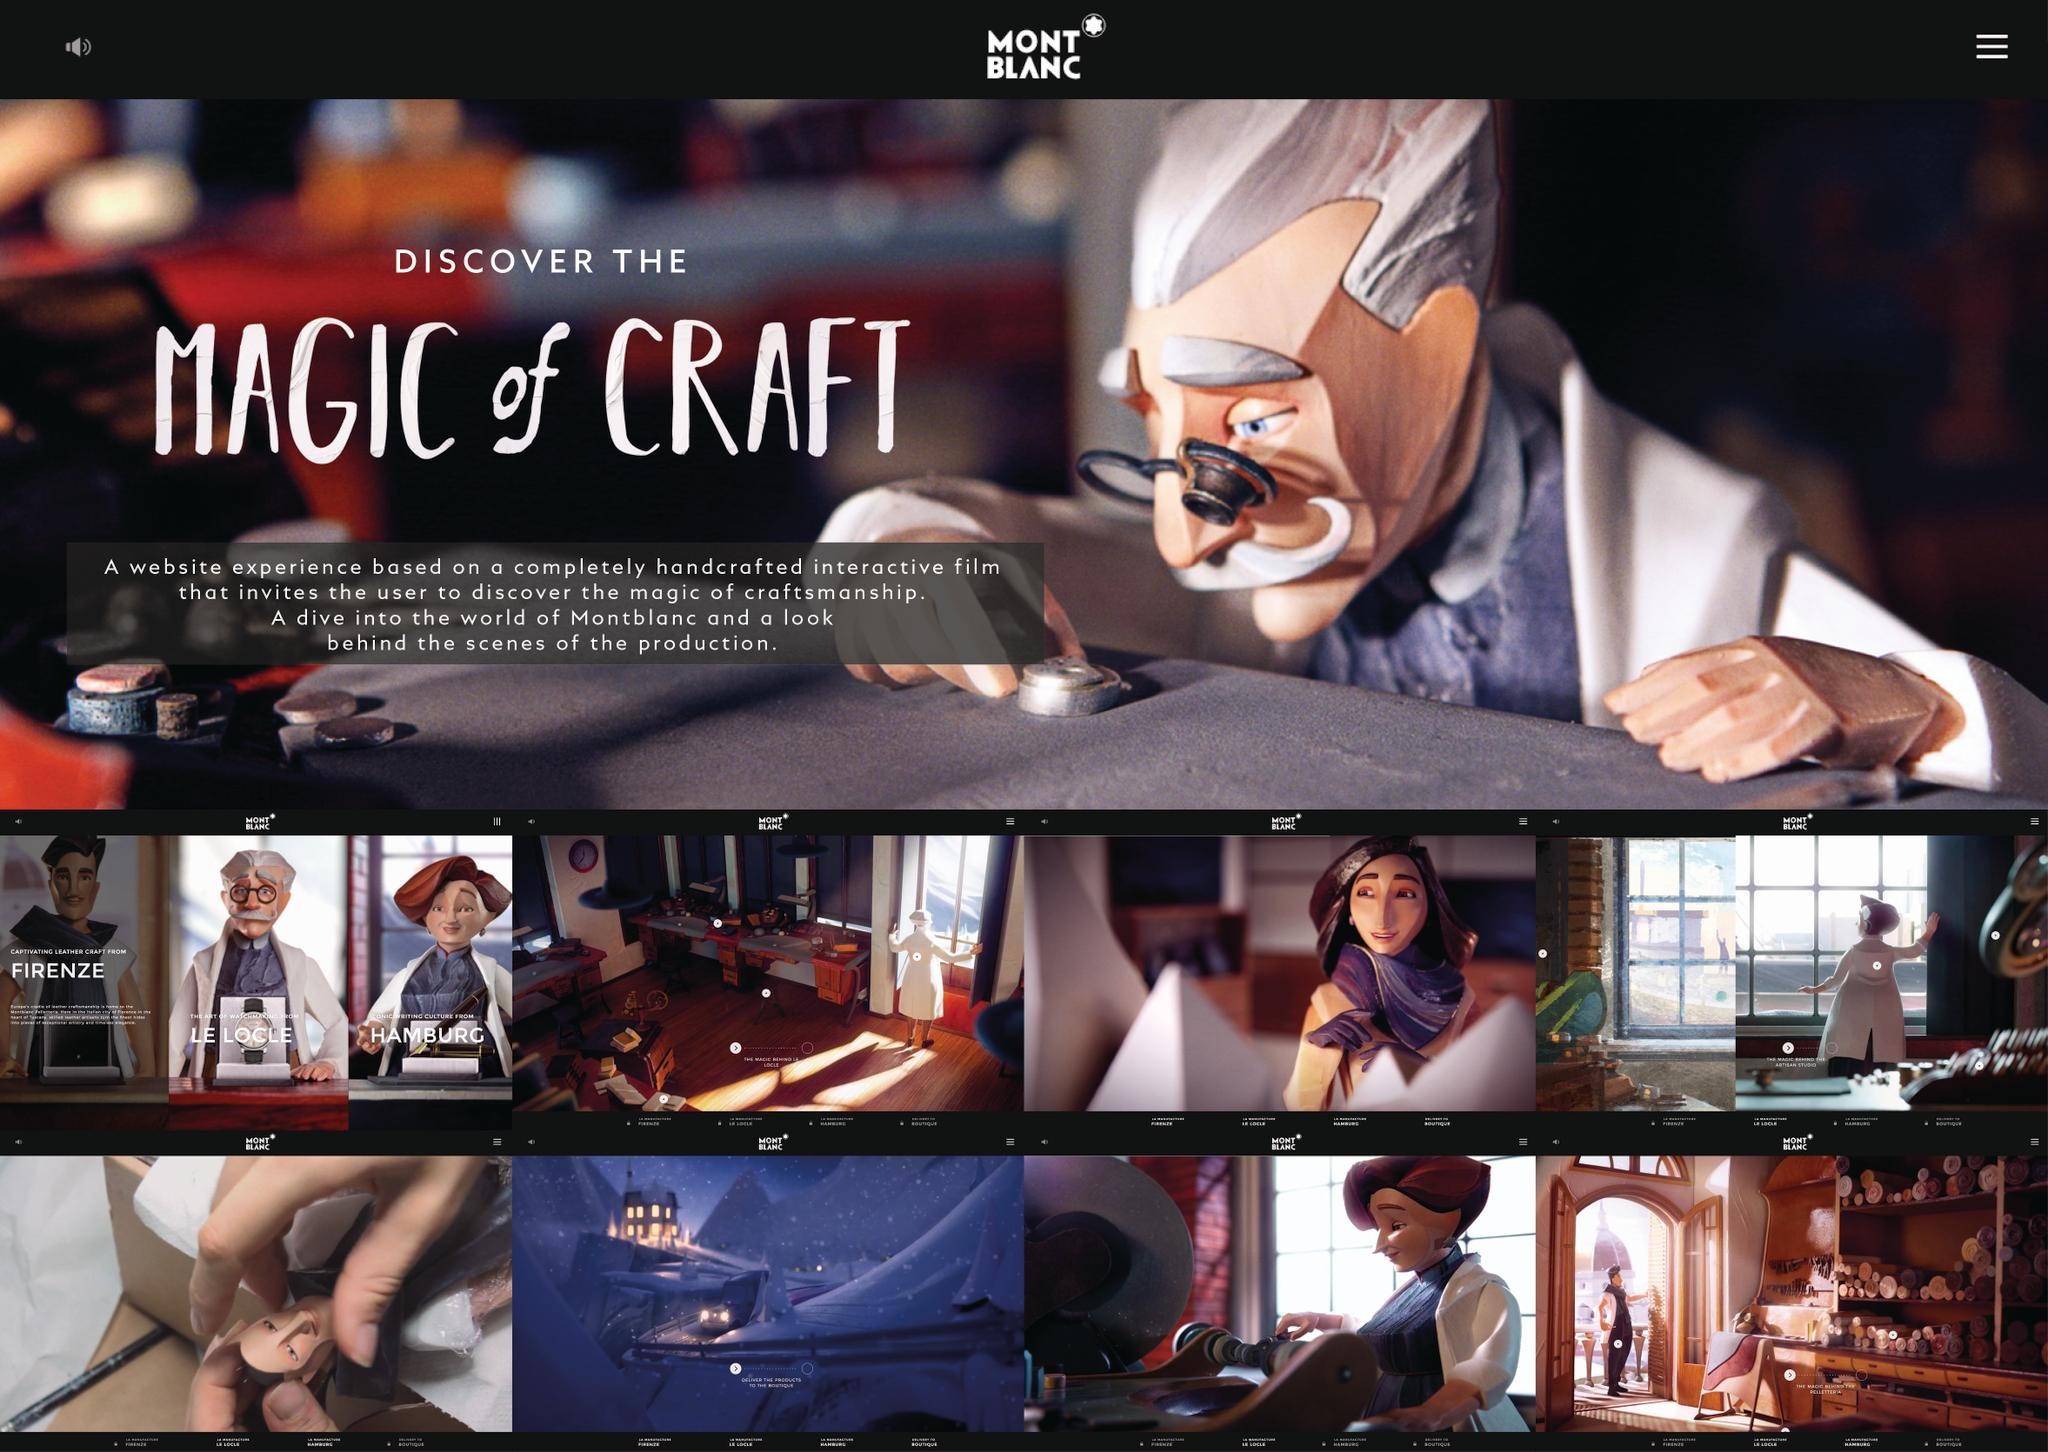 DISCOVER THE MAGIC OF CRAFT